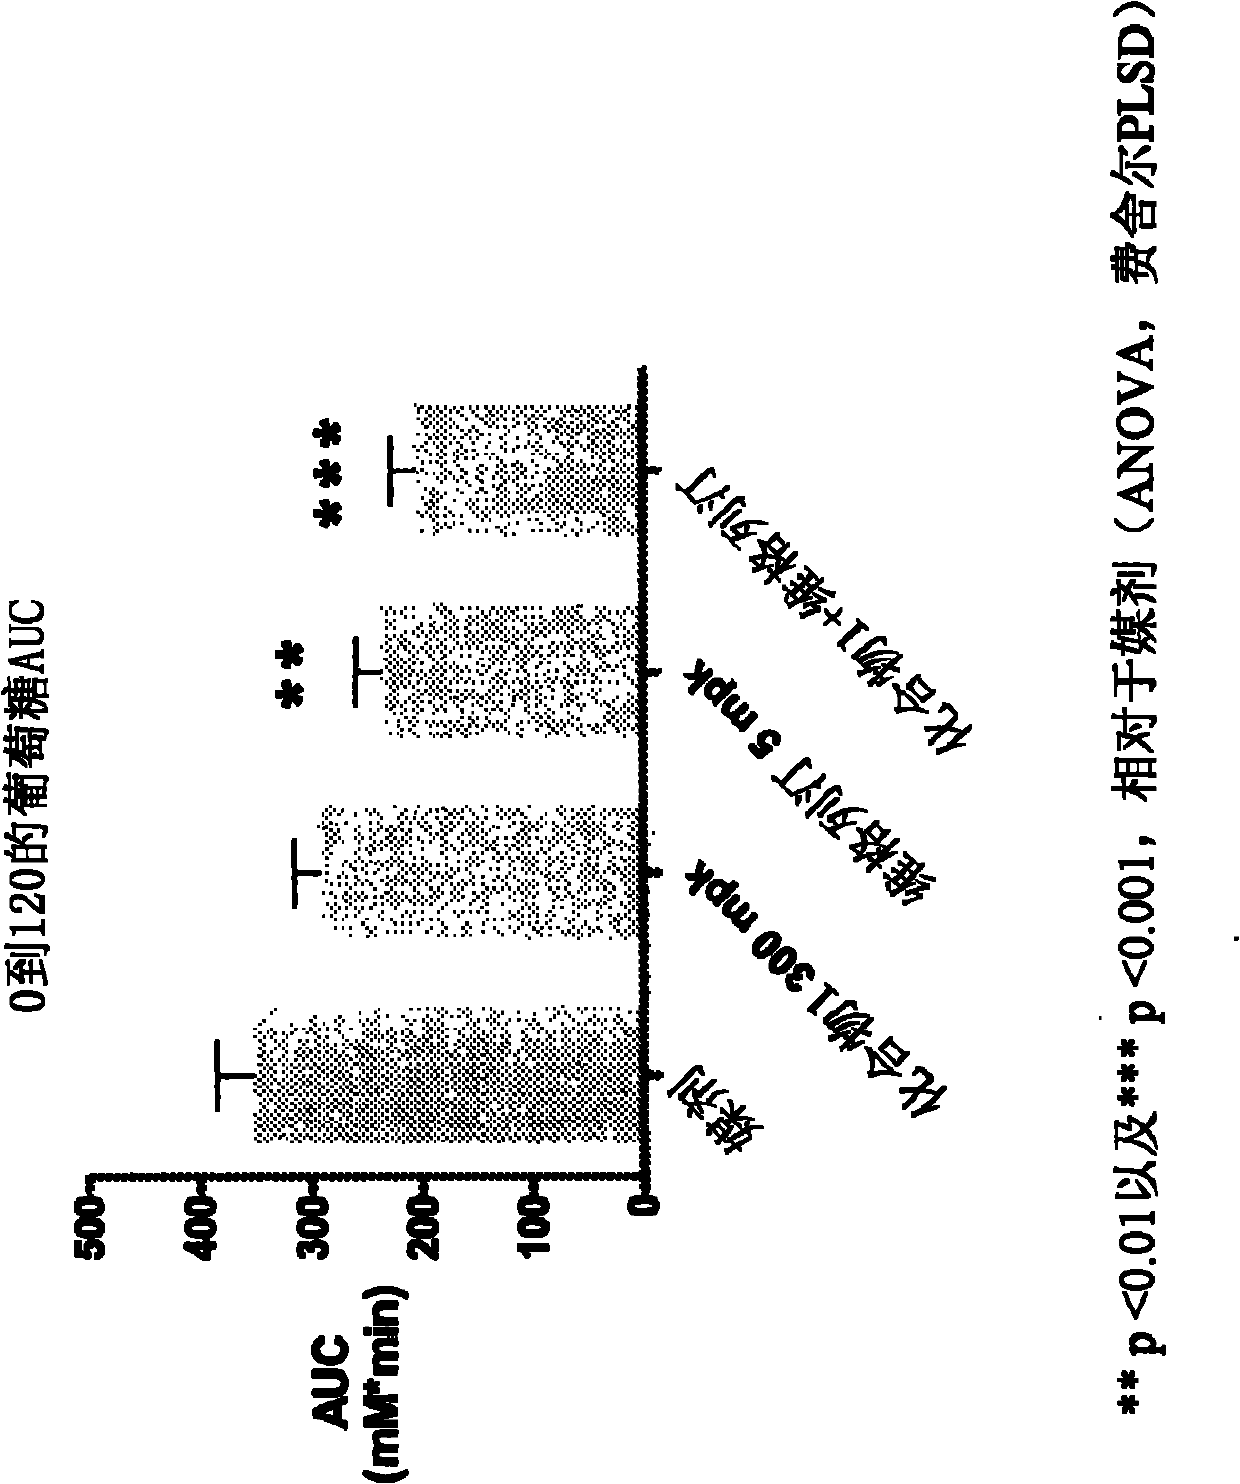 Oxymethylene aryl compounds and uses thereof